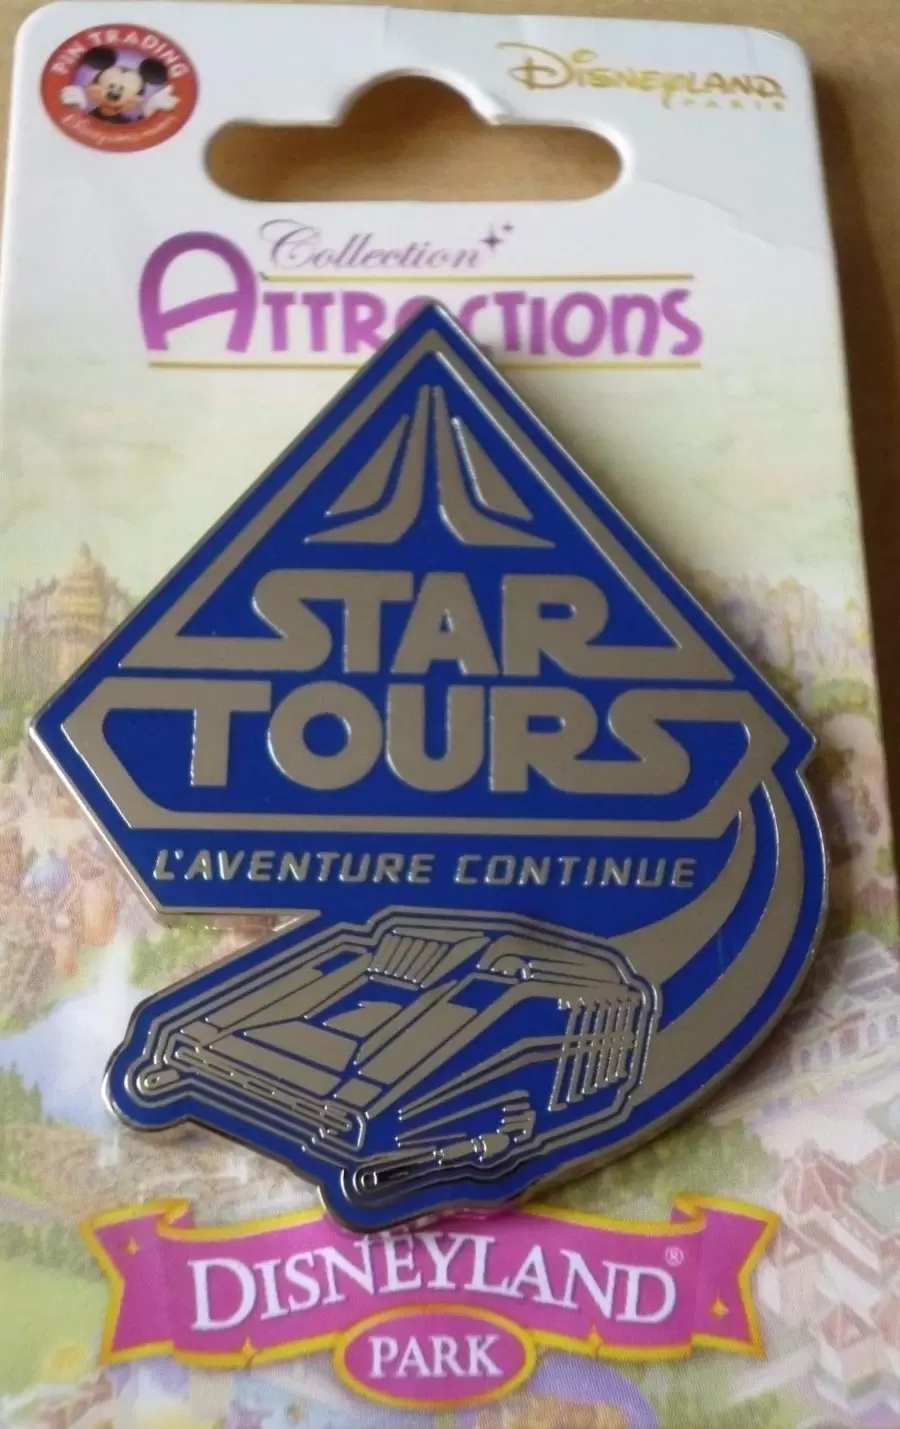 Disney - Collection Attractions - Attractions Star Tour New